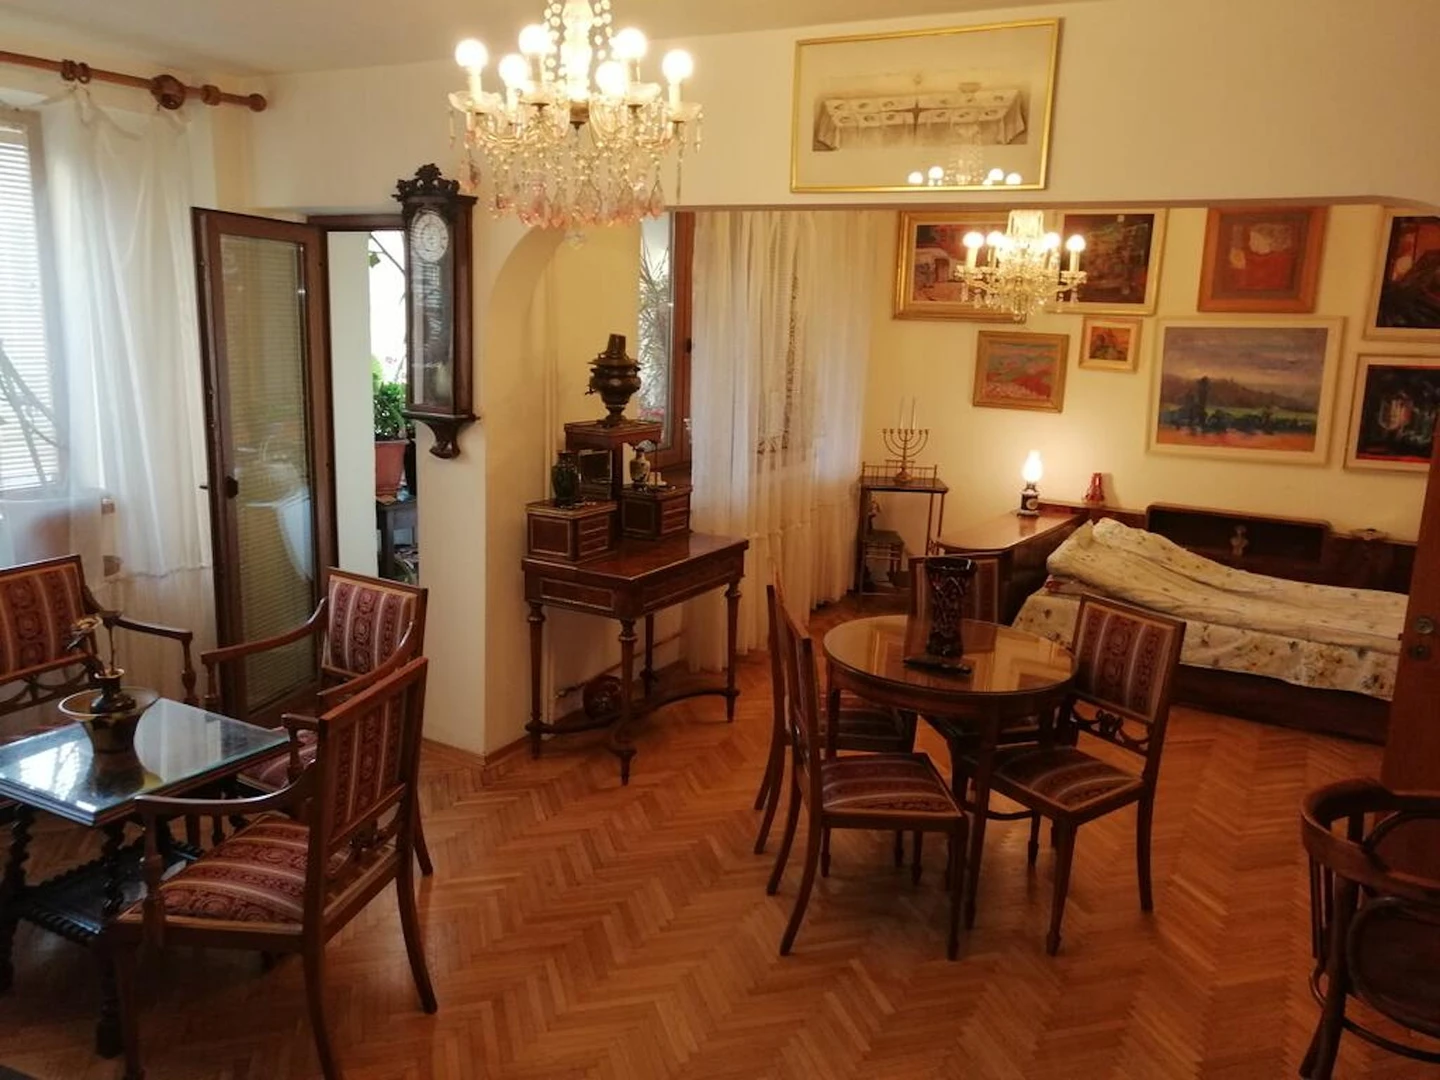 Accommodation in the centre of Bucharest